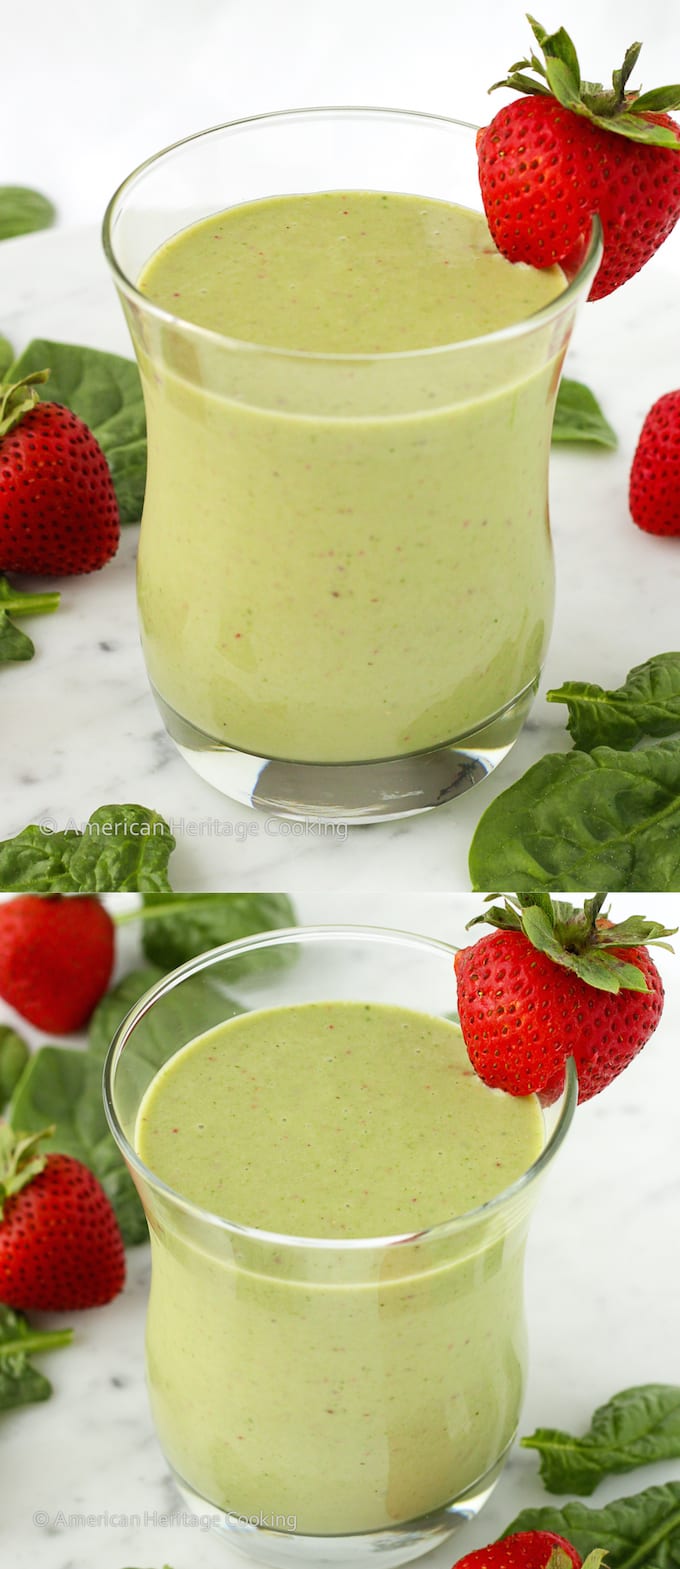 This easy recipe for a healthy Strawberry Banana Spinach Smoothie is fast, easy and delicious!!!